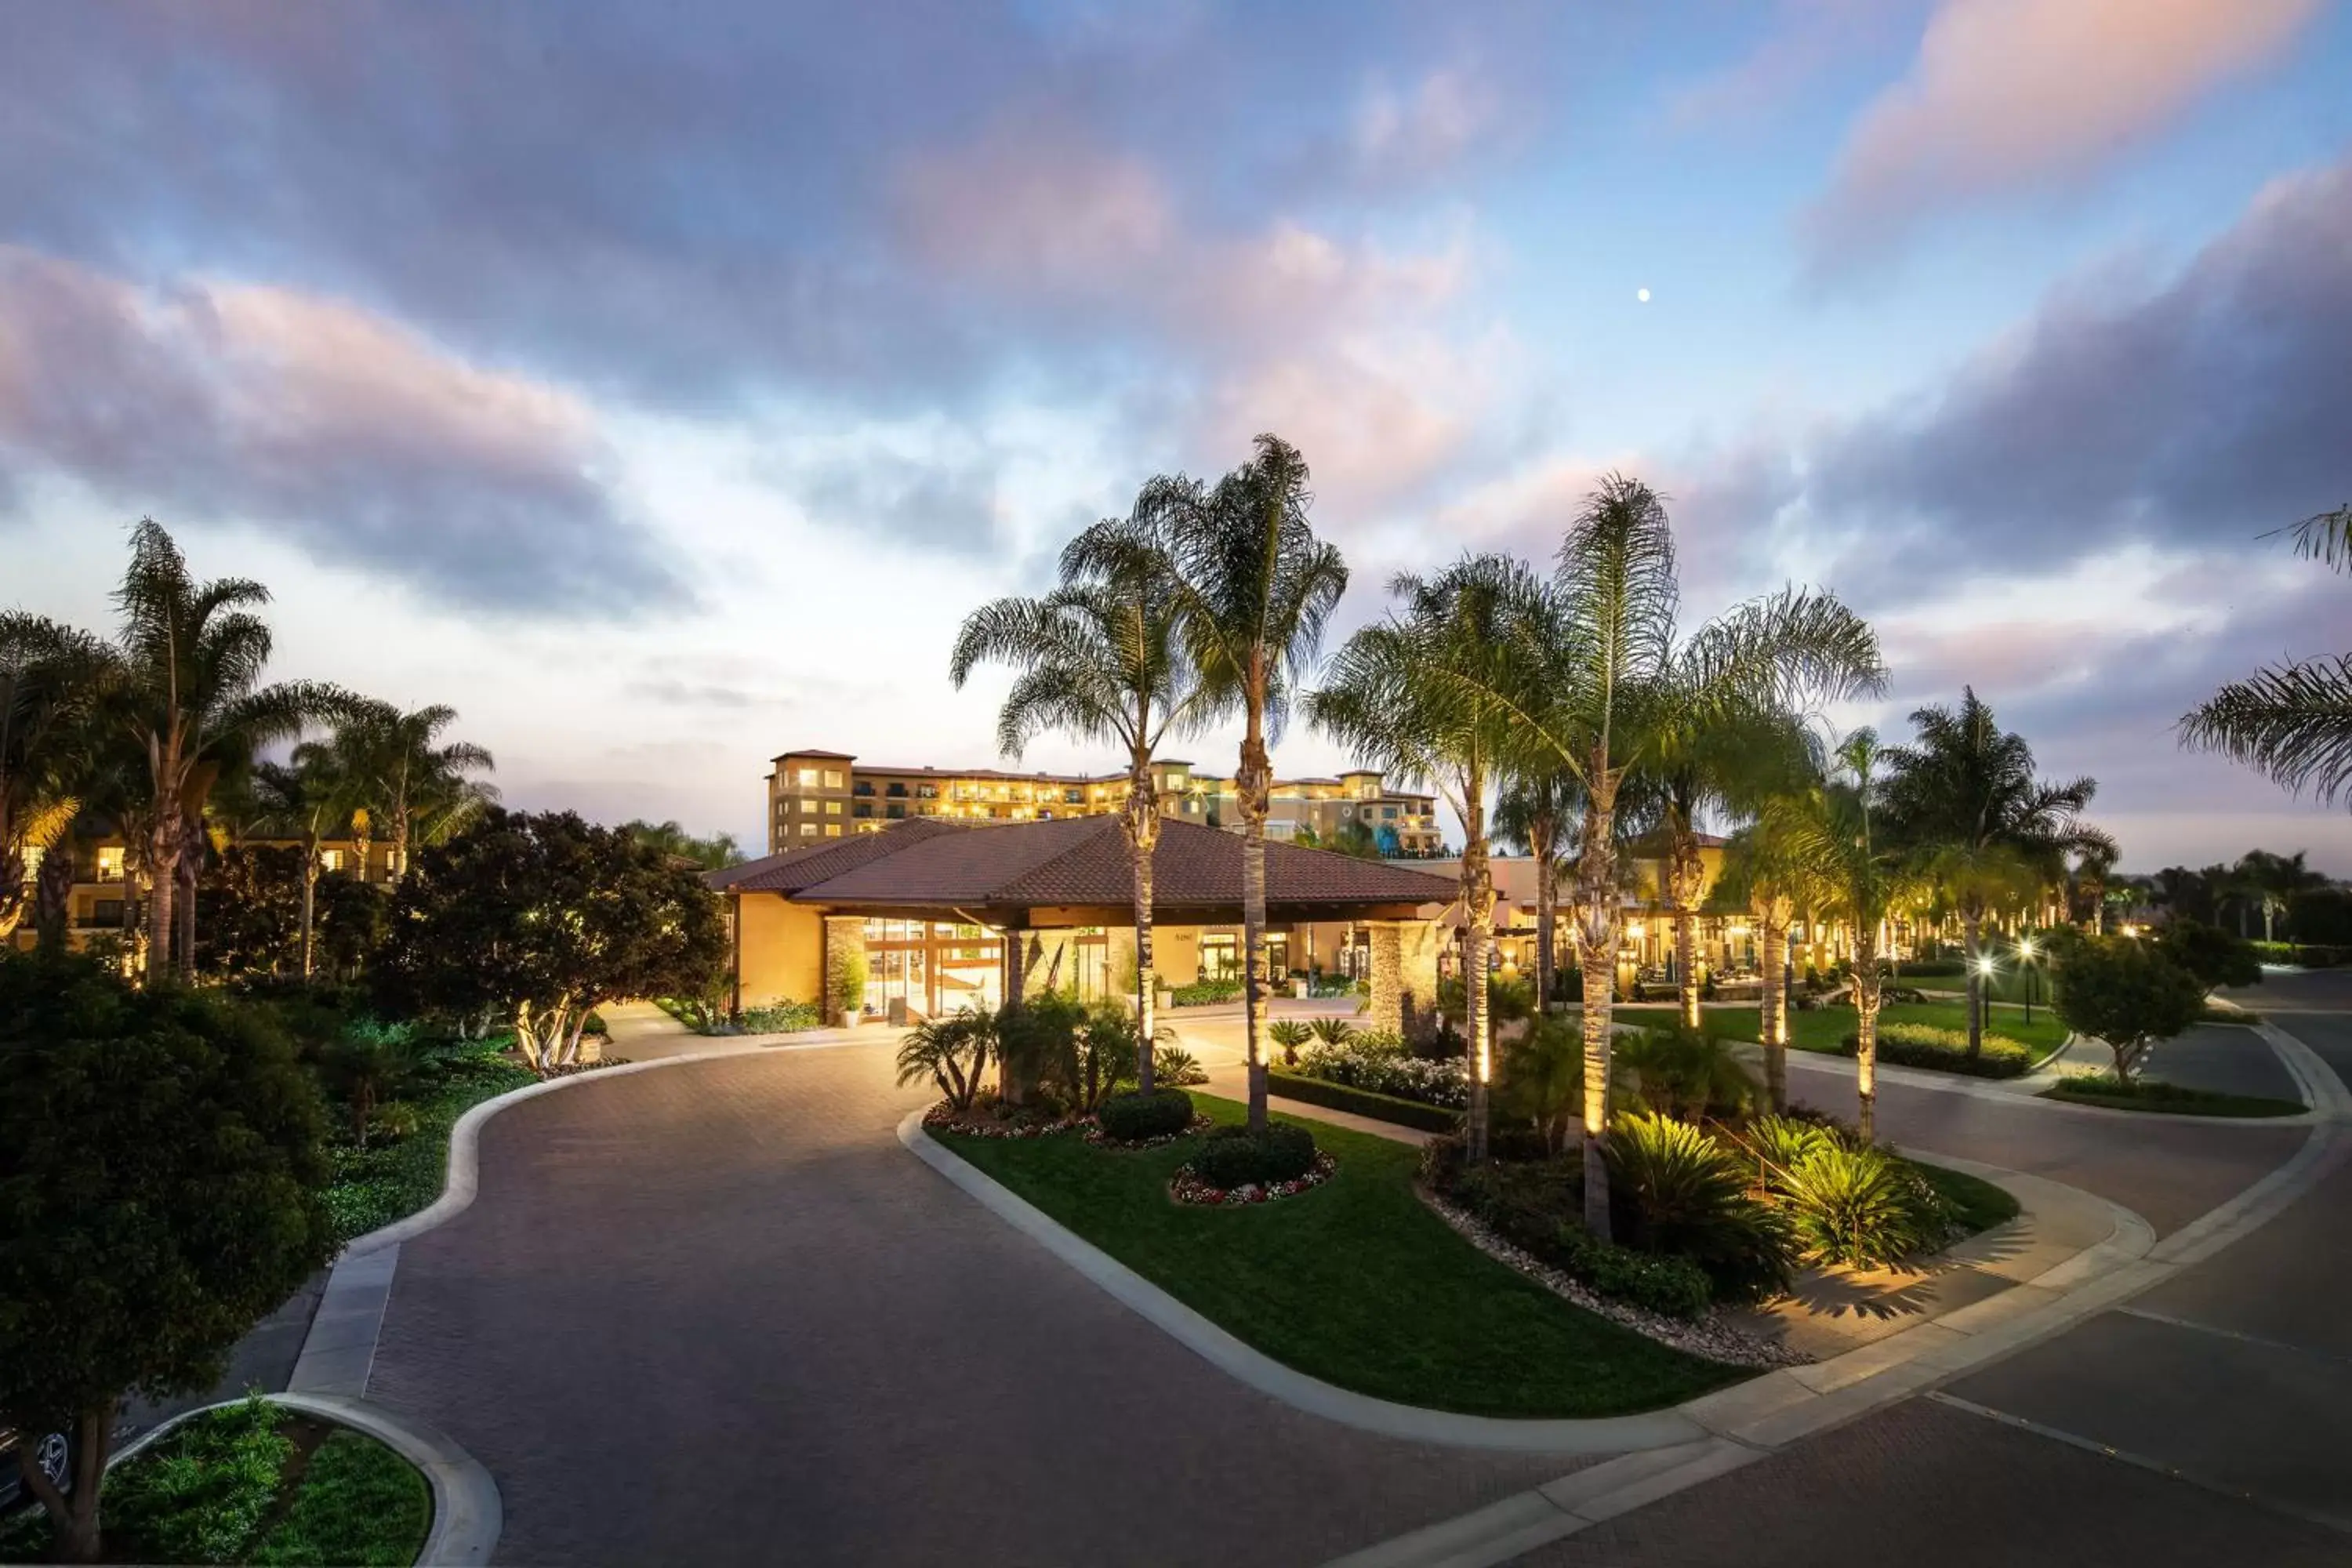 Property Building in The Westin Carlsbad Resort & Spa